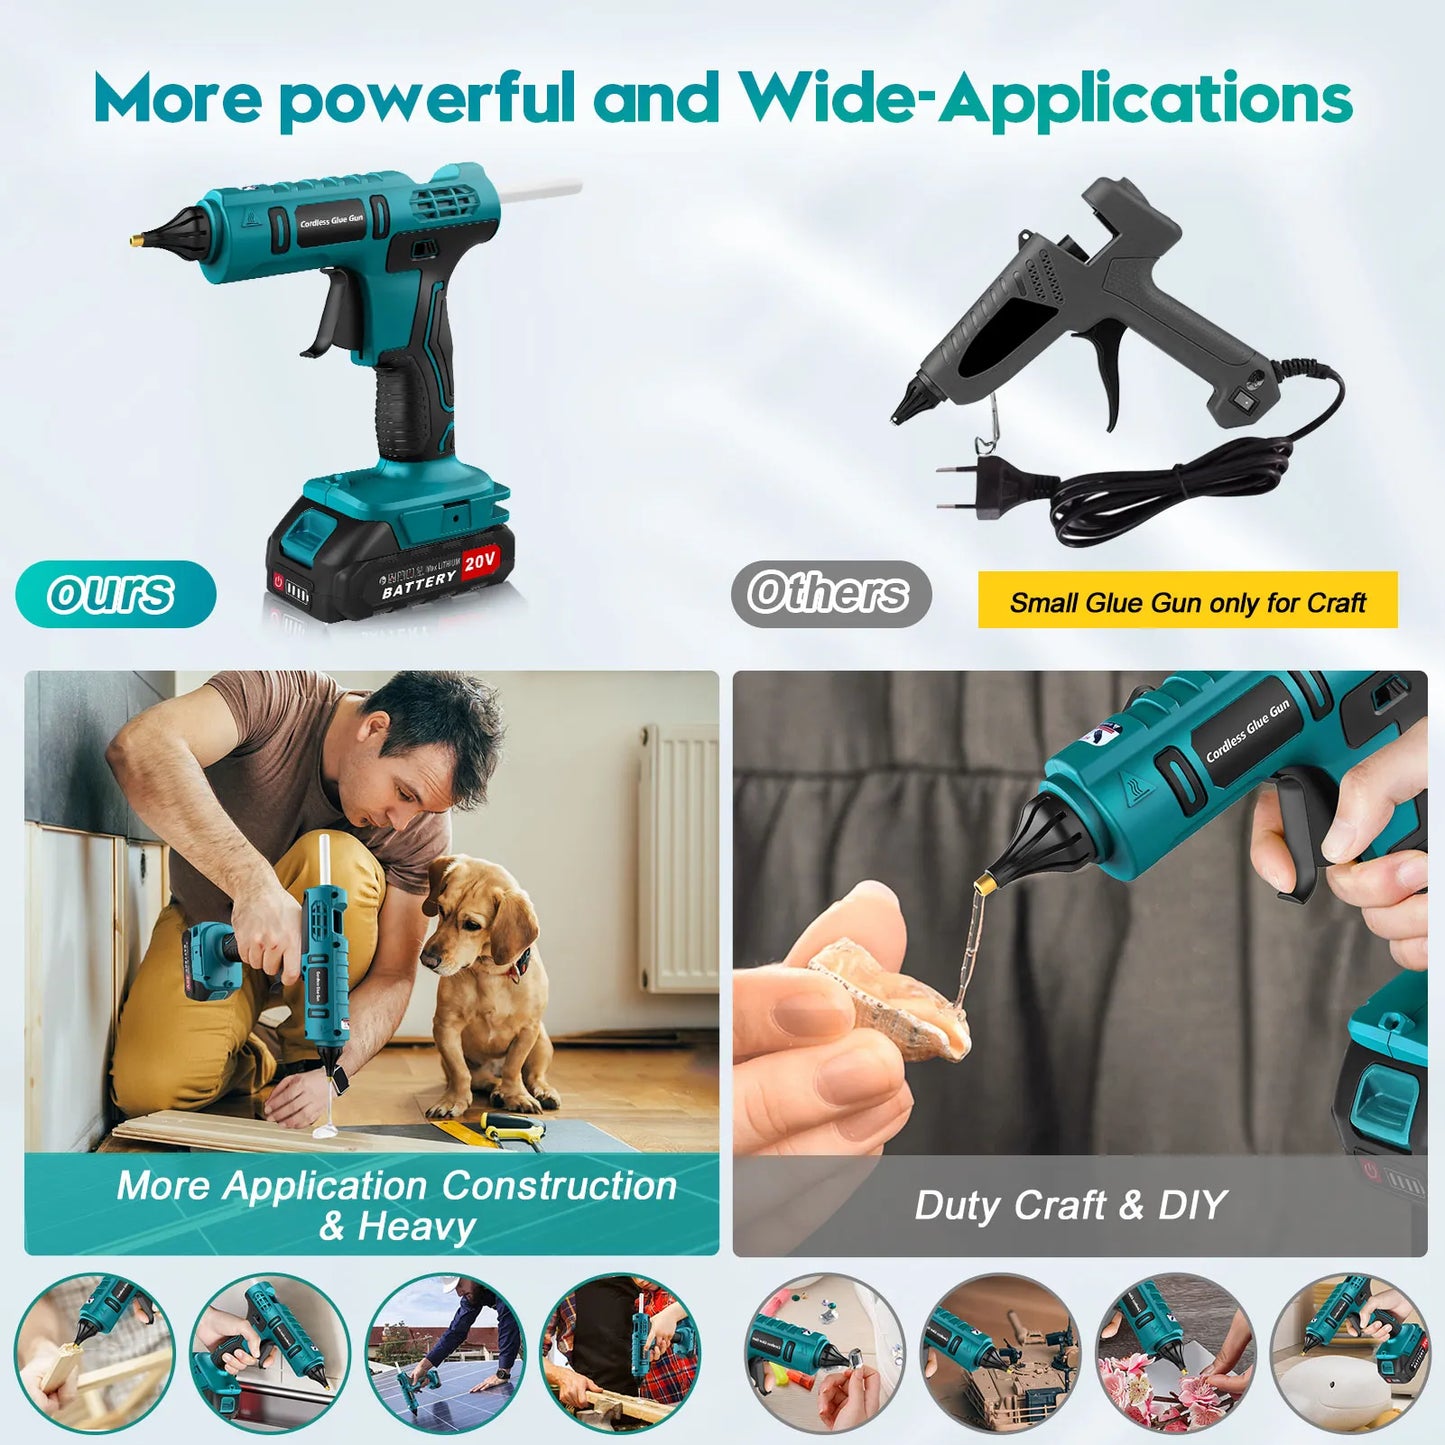 Versatile Cordless Electric Handheld Glue Gun Kit with Anti-Scald Nozzle and 12 Sticks for Dewalt - Your Ultimate Repair and DIY Companion